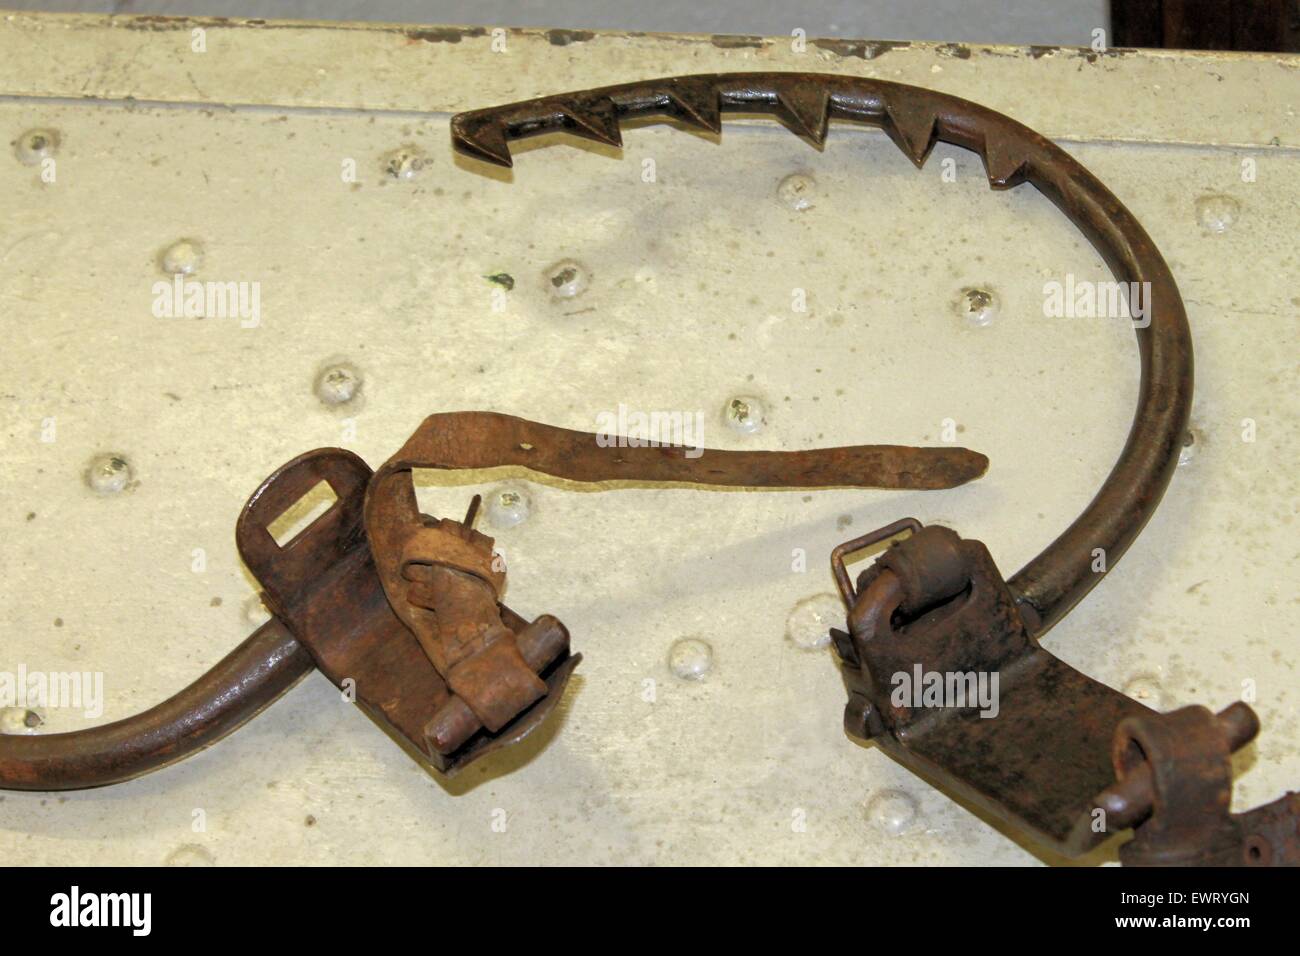 old rusted metal tools work used to climb Stock Photo